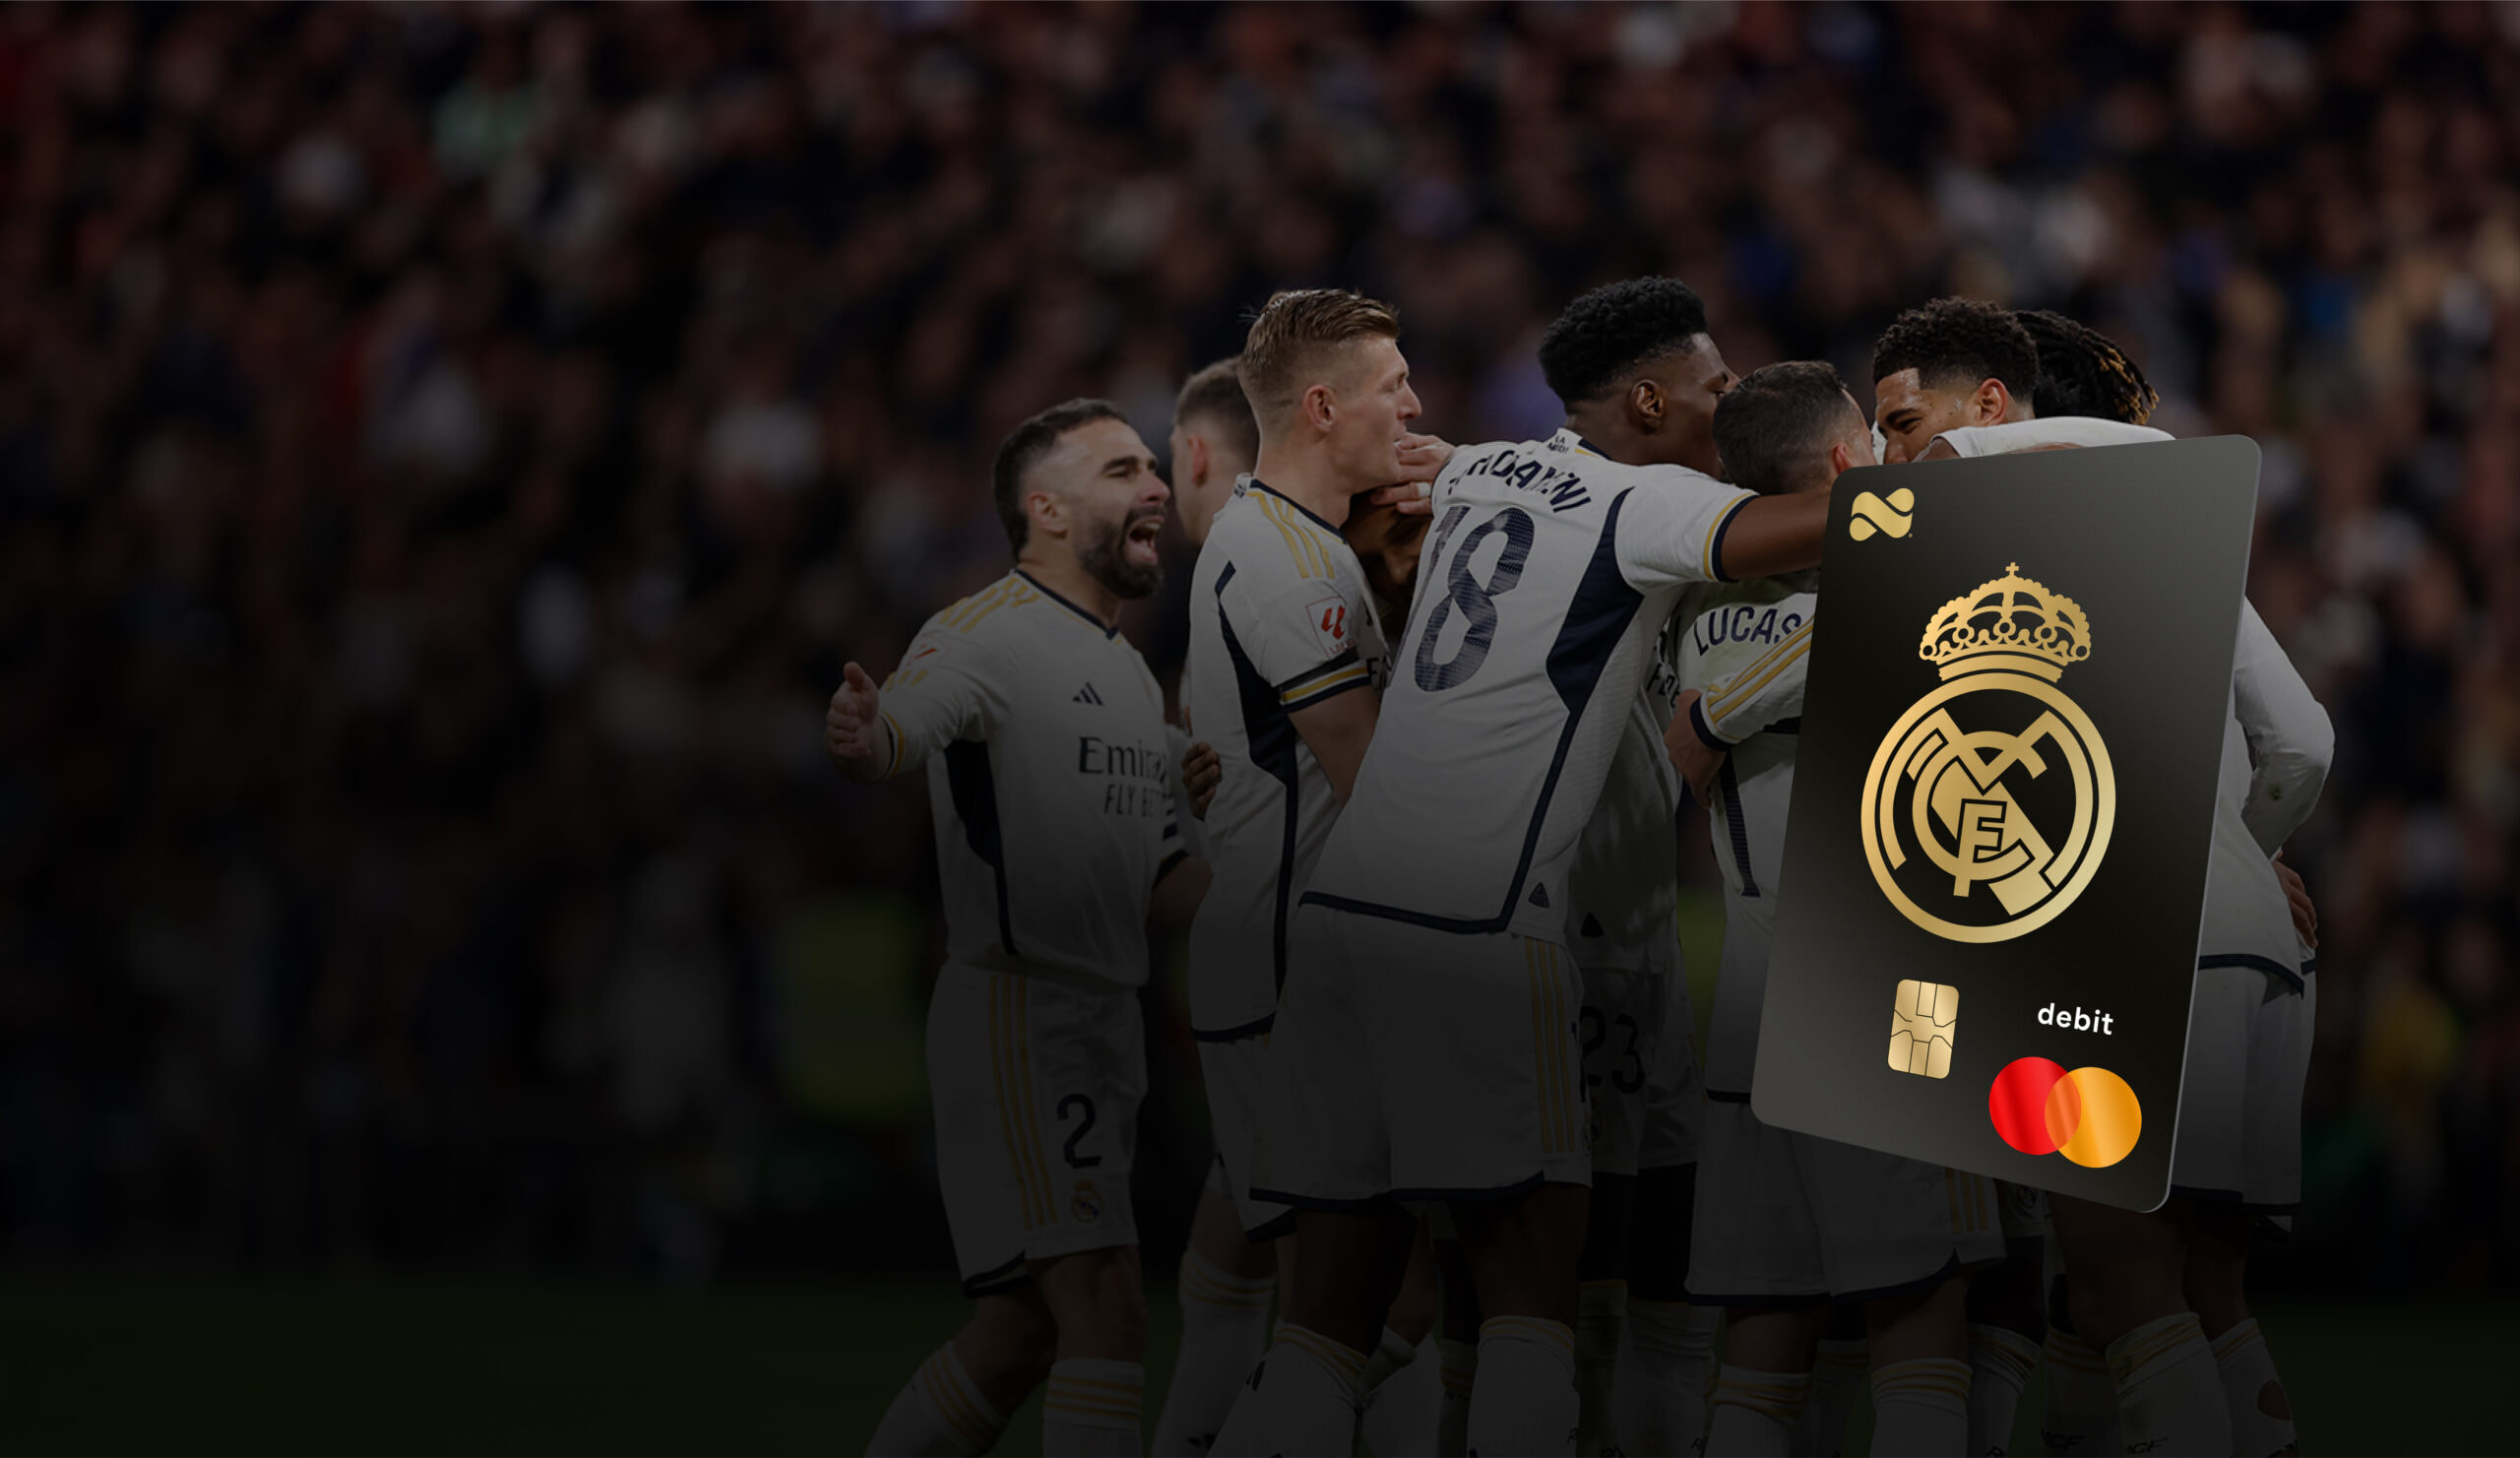 Netspend Real Madrid Mastercard overlayed in front of Real Madrid players huddled